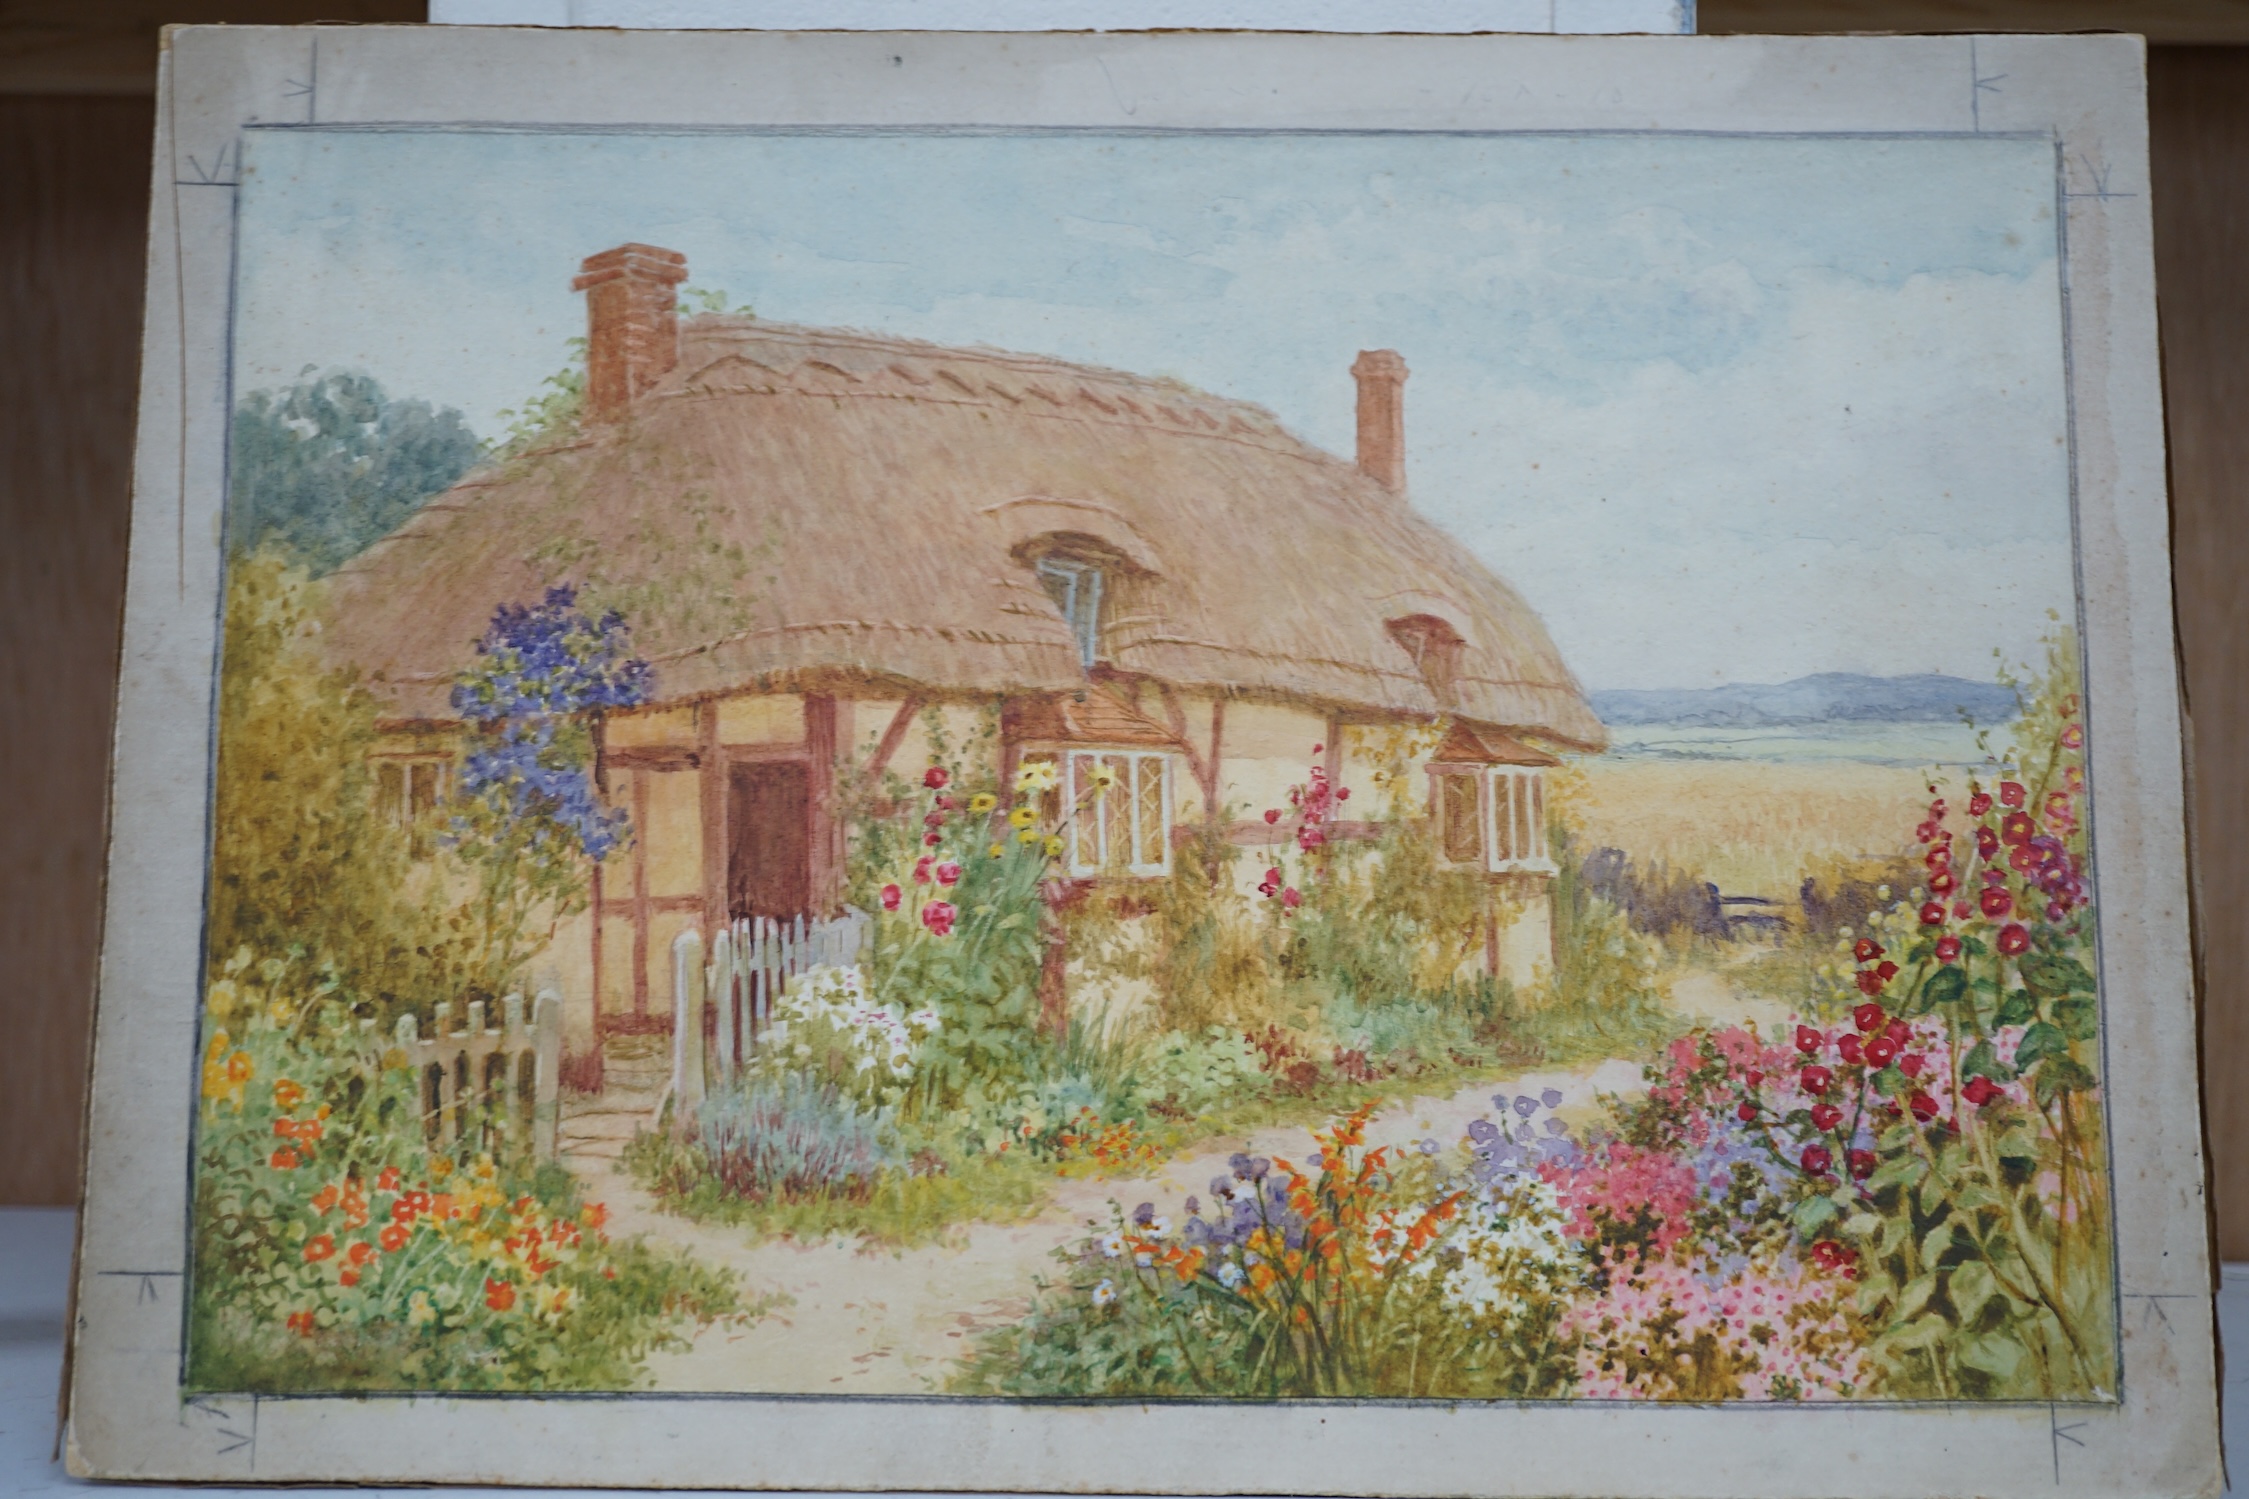 William Affleck (aka, William Carruthers, 1868-1943), four watercolours on card, ‘Springtime at Cropthorne, Worcestershire’, ‘Surrey cottage at Witley’, ‘Cottage at Welford-on-Avon, Warwickshire’ and ‘Stonewall Farm, Cha